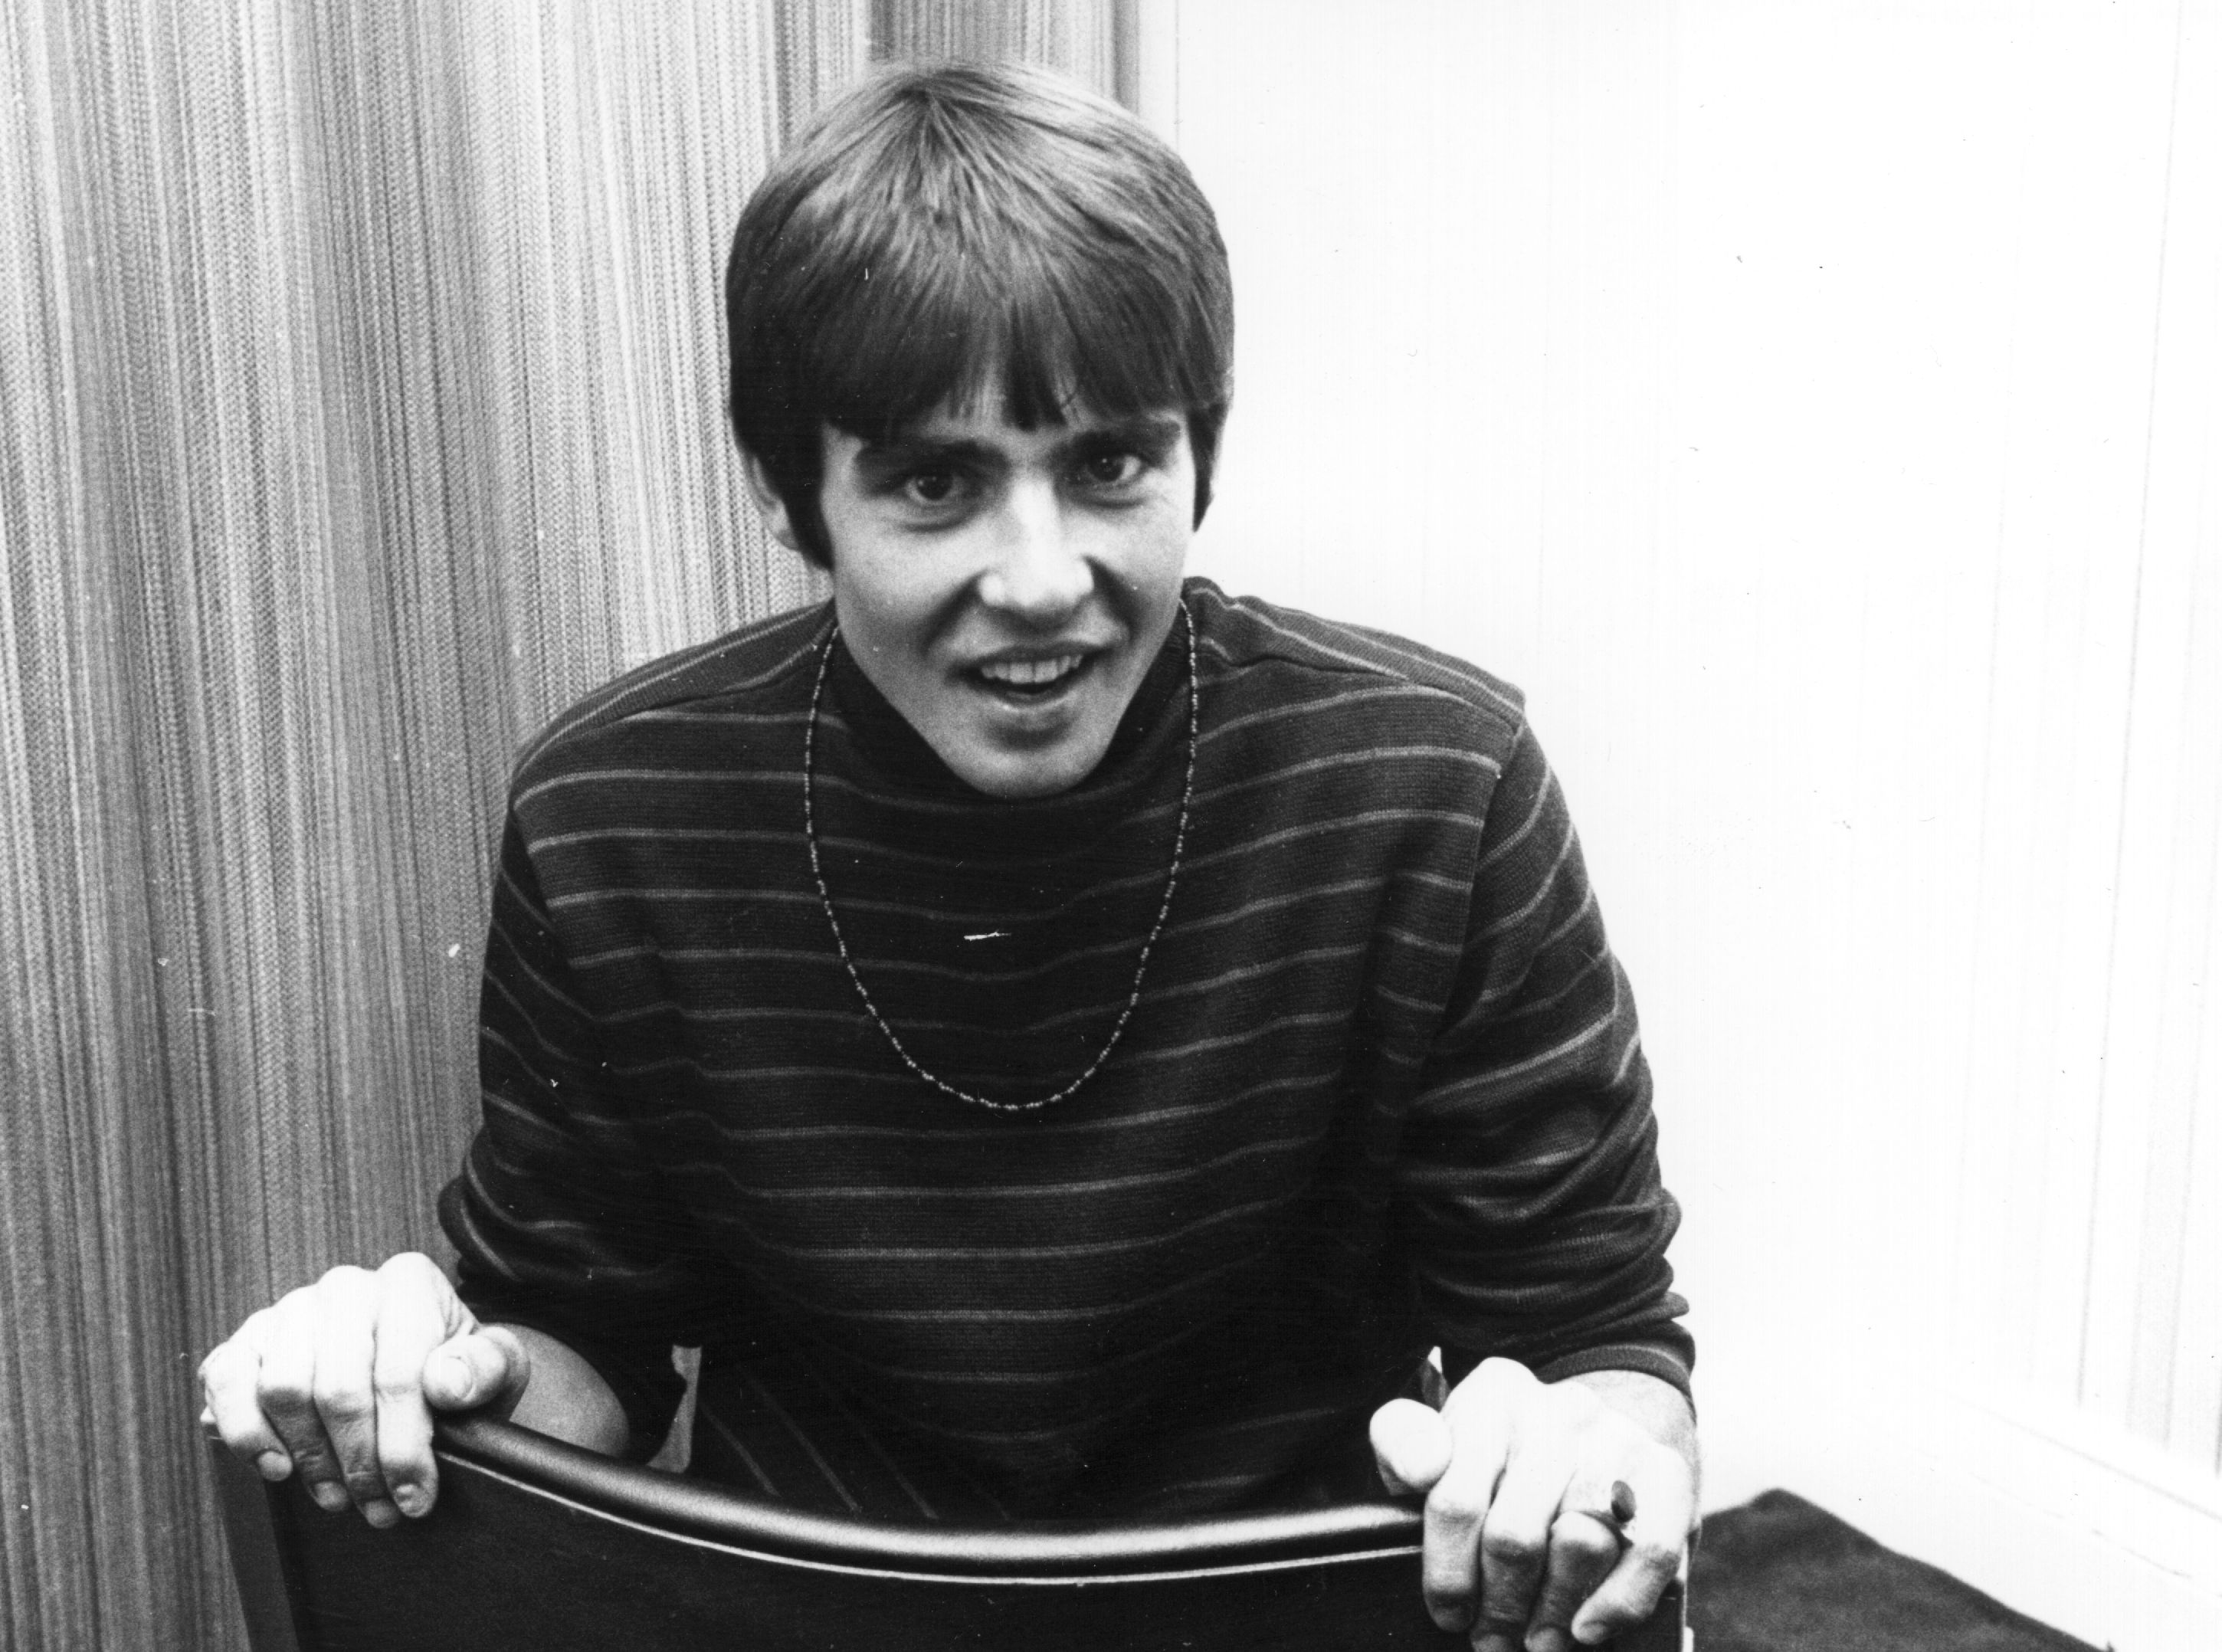 The Monkees' Davy Jones sitting on a chair